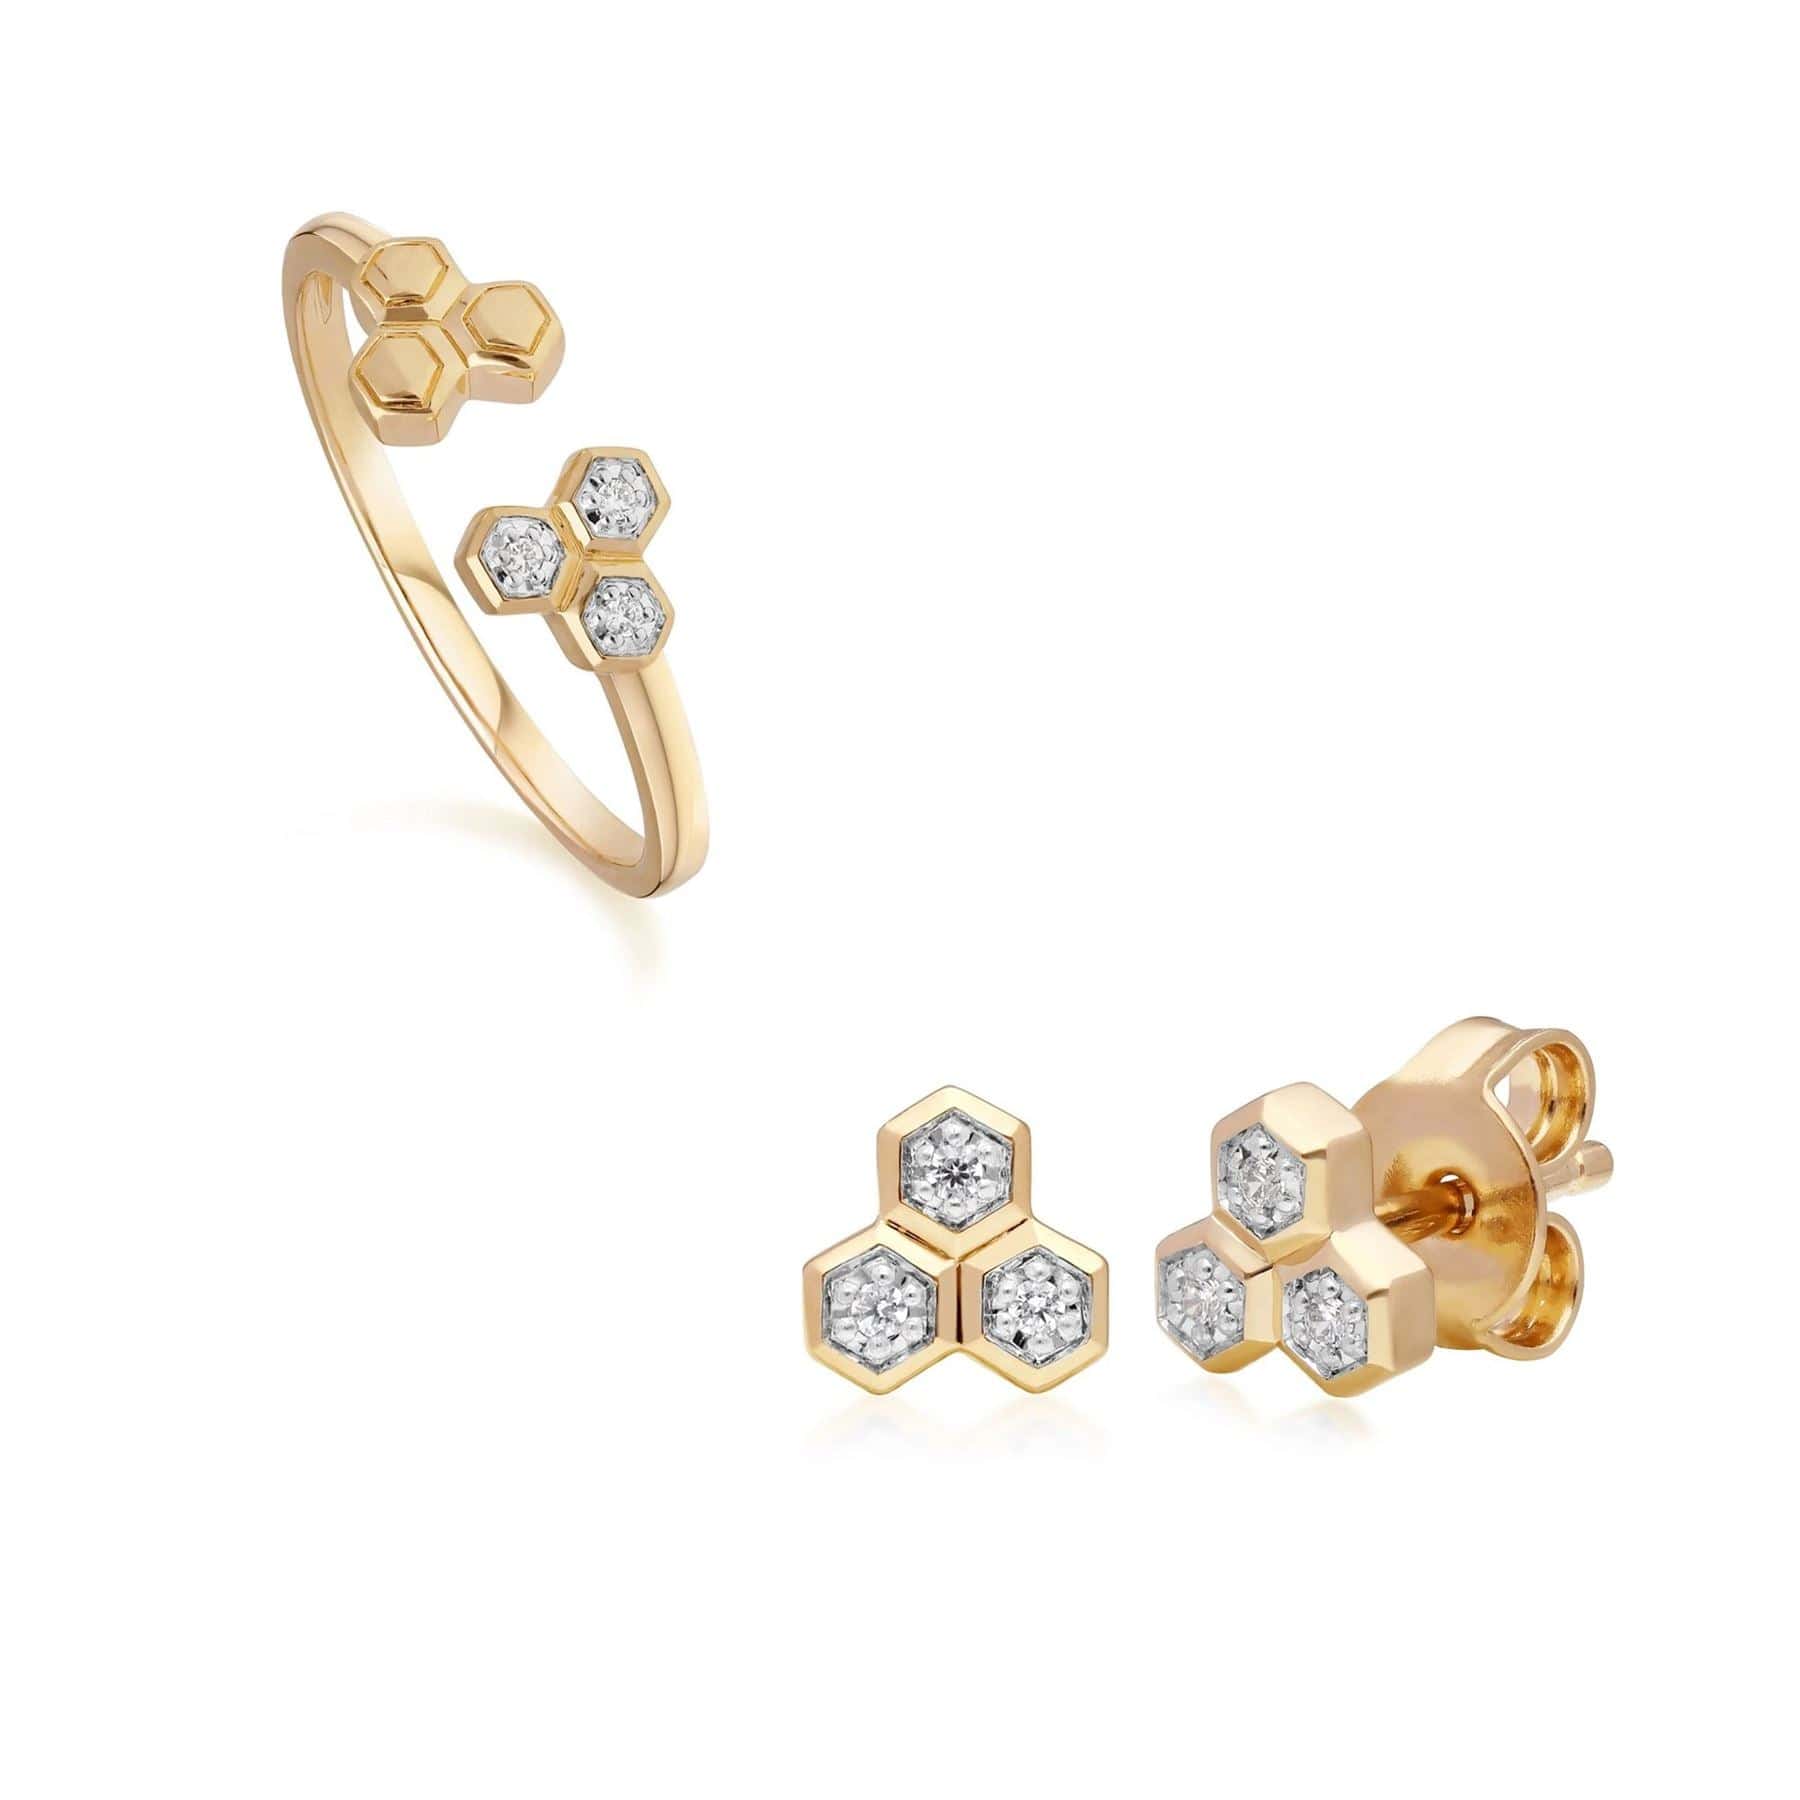 191E0398019-191R0907019 Diamond Trilogy Ring & Stud Earring Set in 9ct Yellow Gold 1